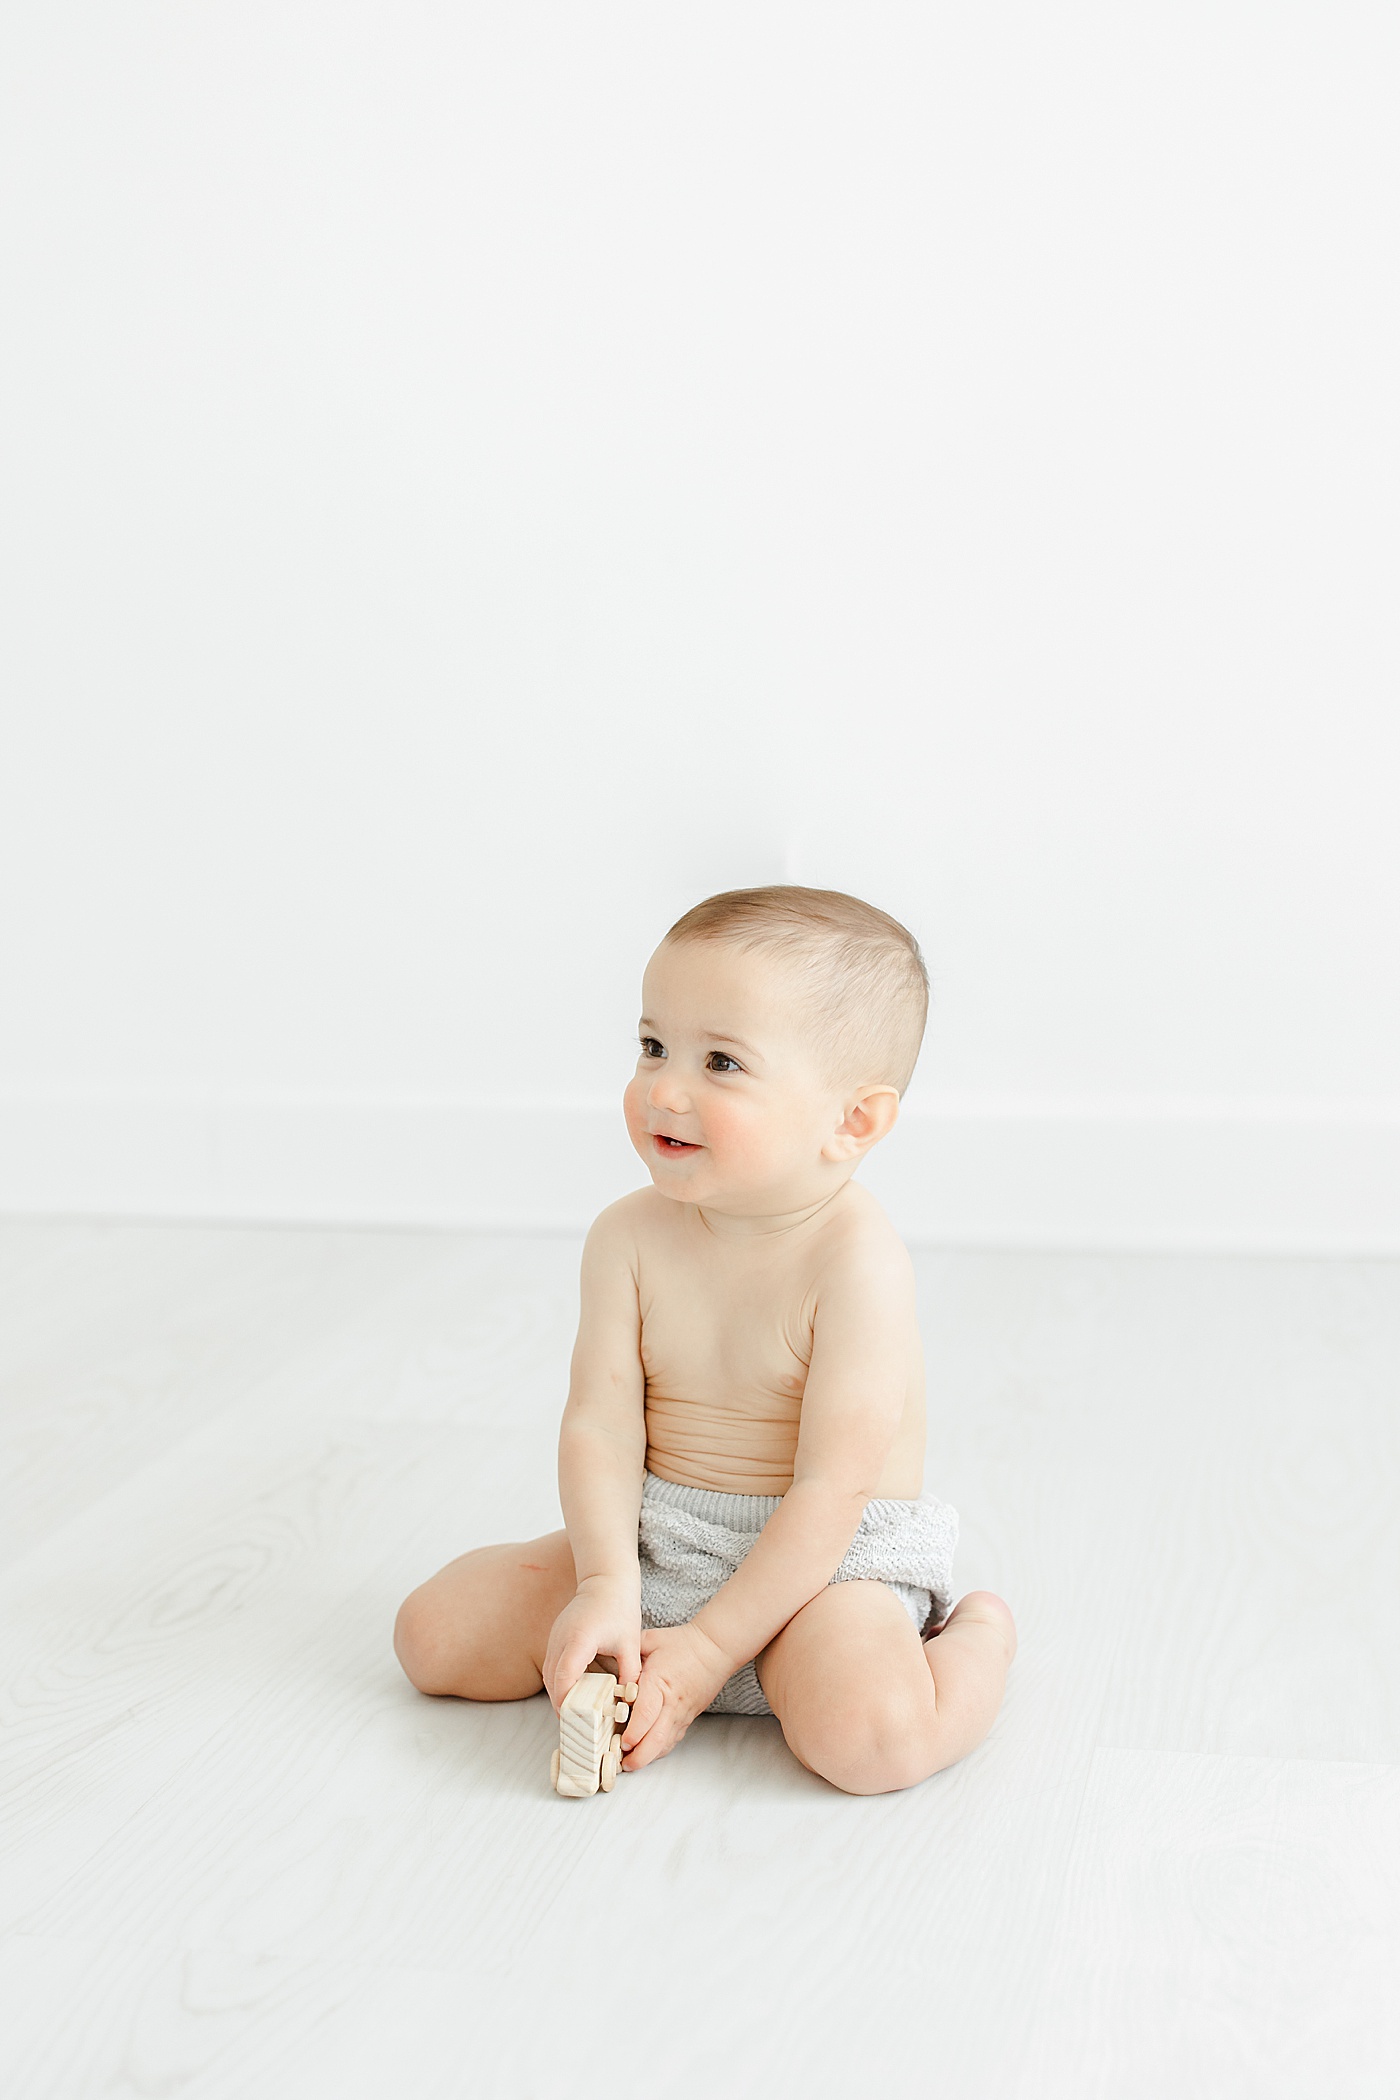 One year old boy playing with wood truck during first birthday photoshoot with Kristin Wood Photography.